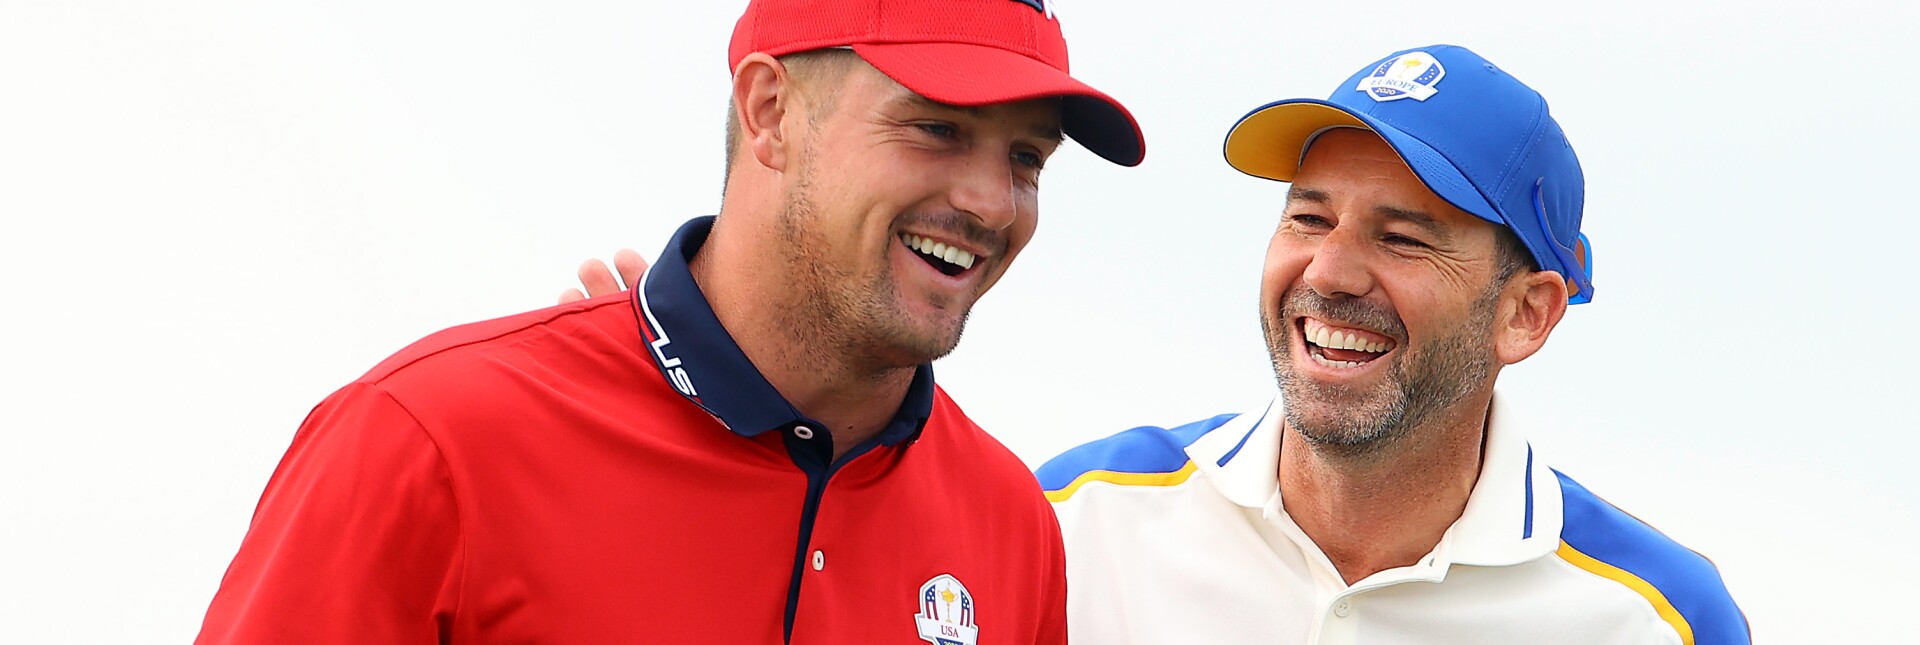 Photo: ryder cup points leaders individual